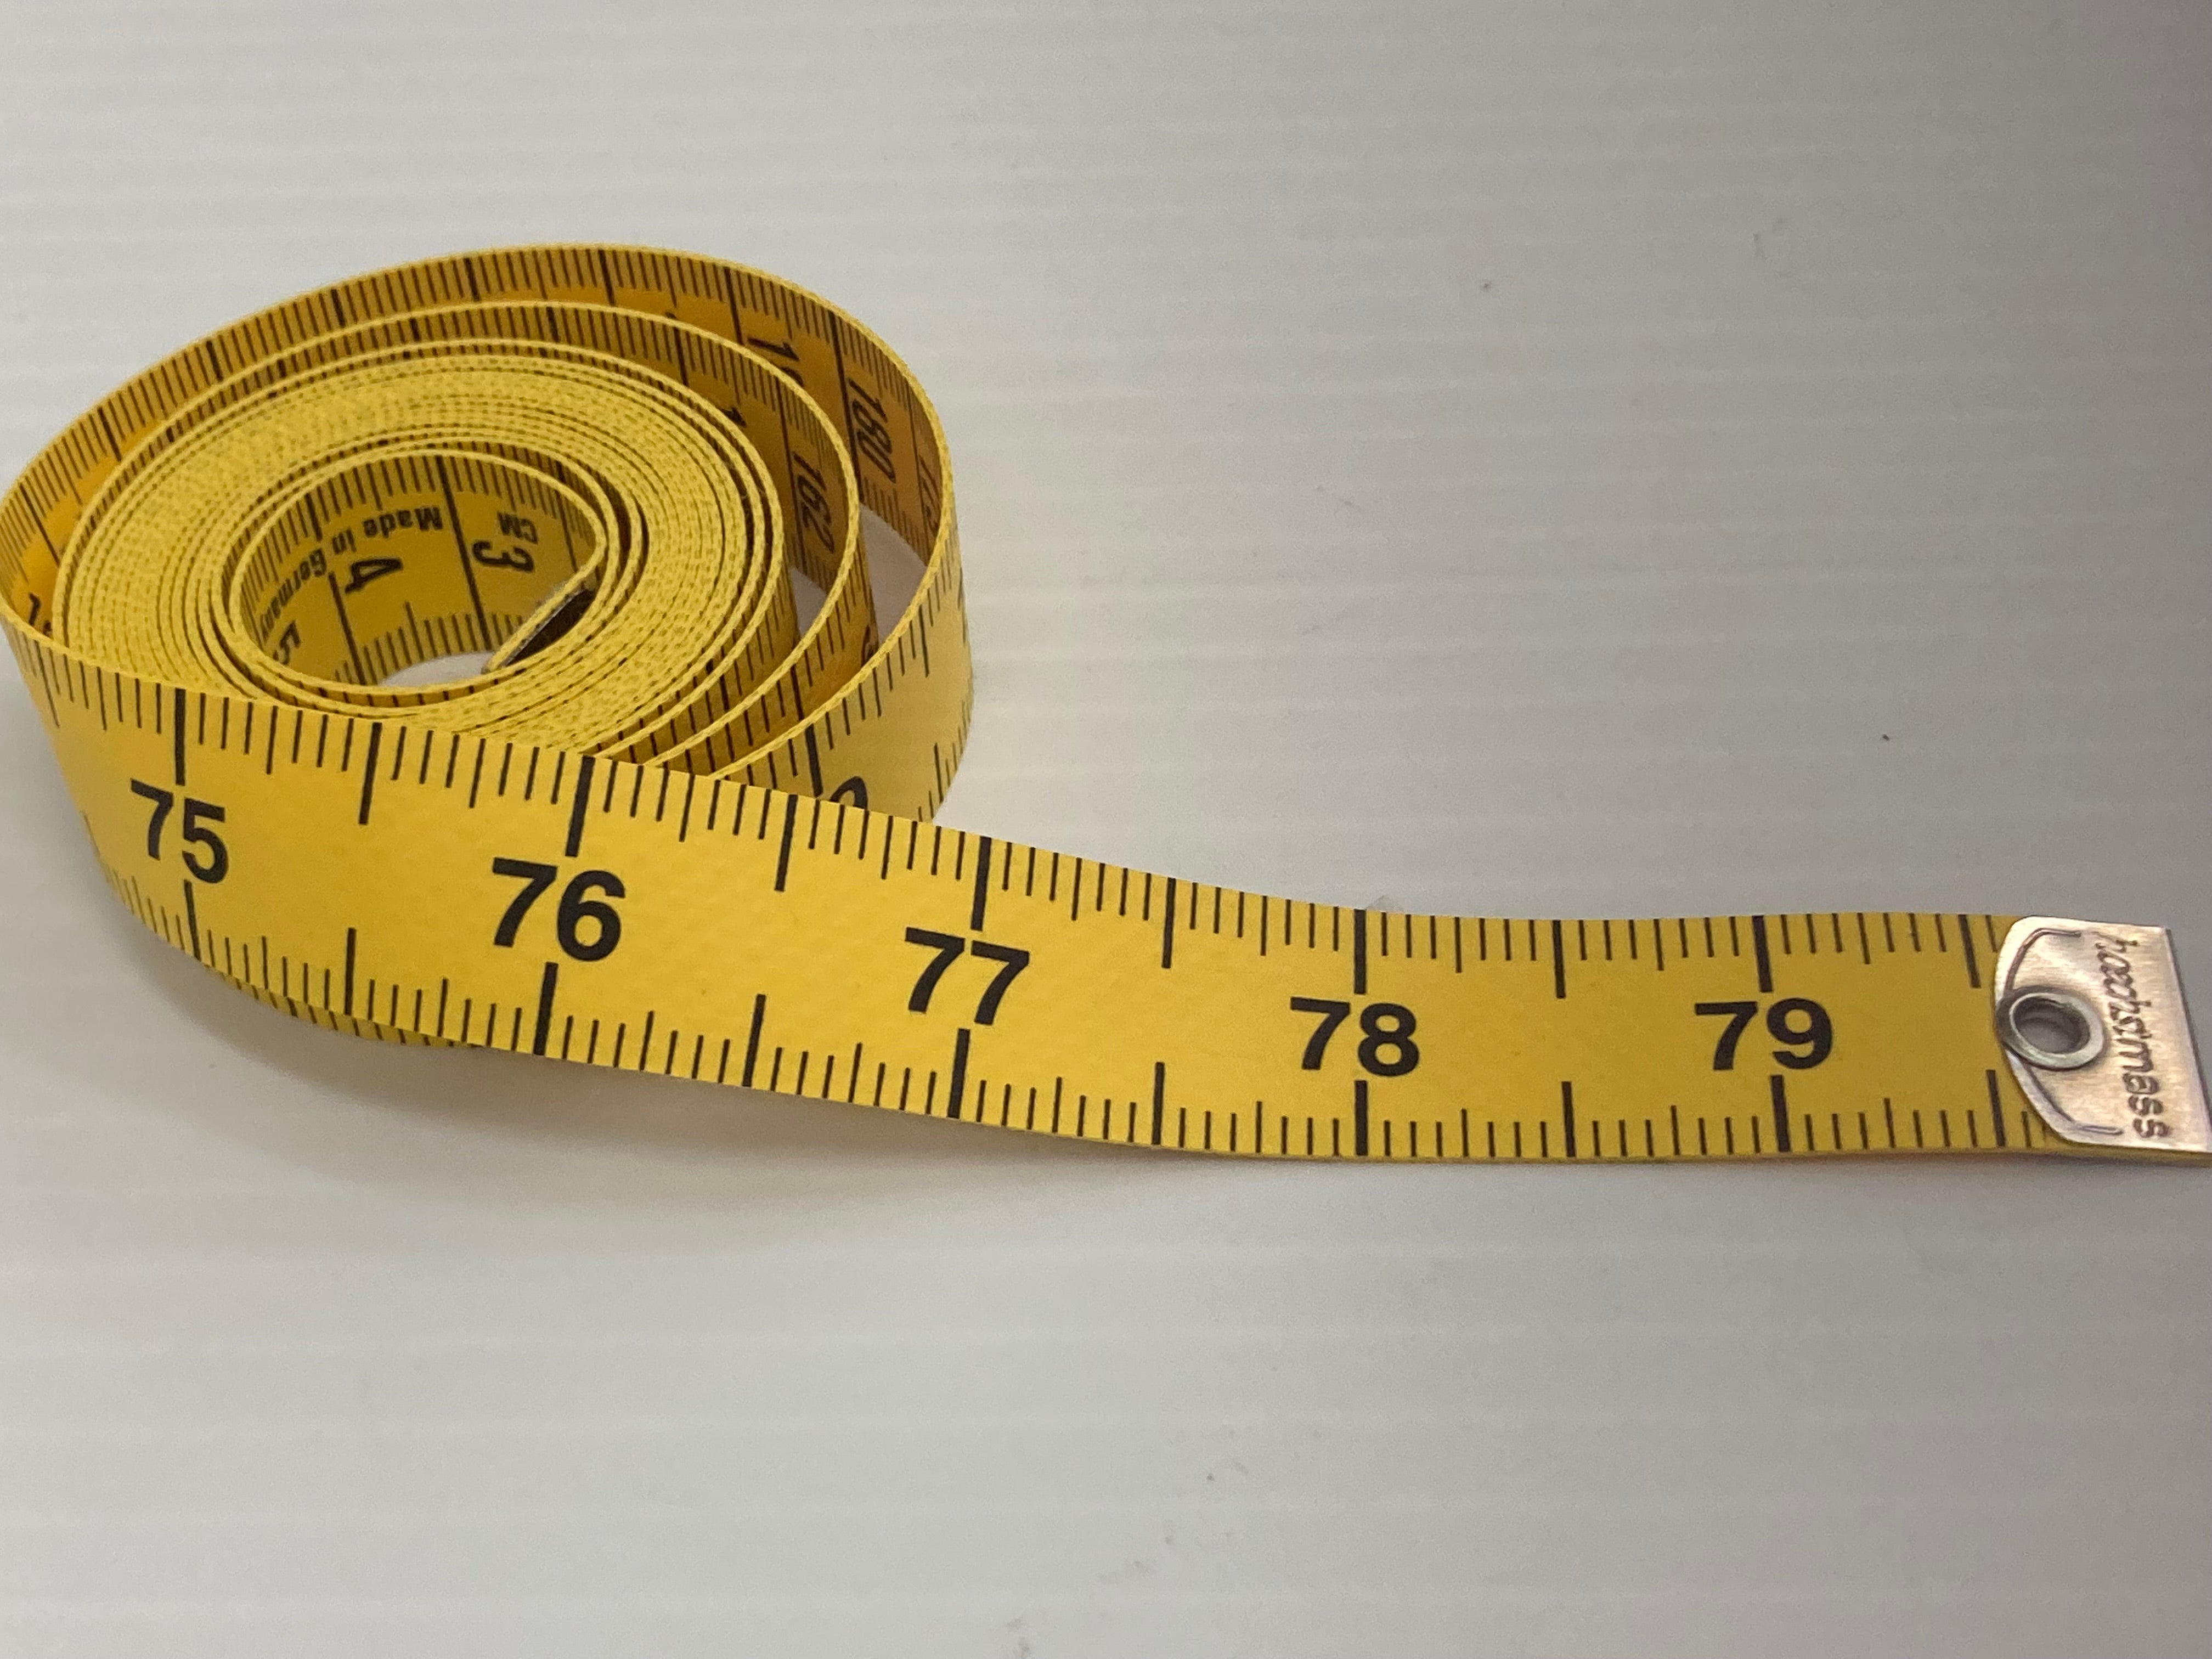 TAPE MEASURE Made in Germany 60 in / 150 Cm Hoechstmass See Our